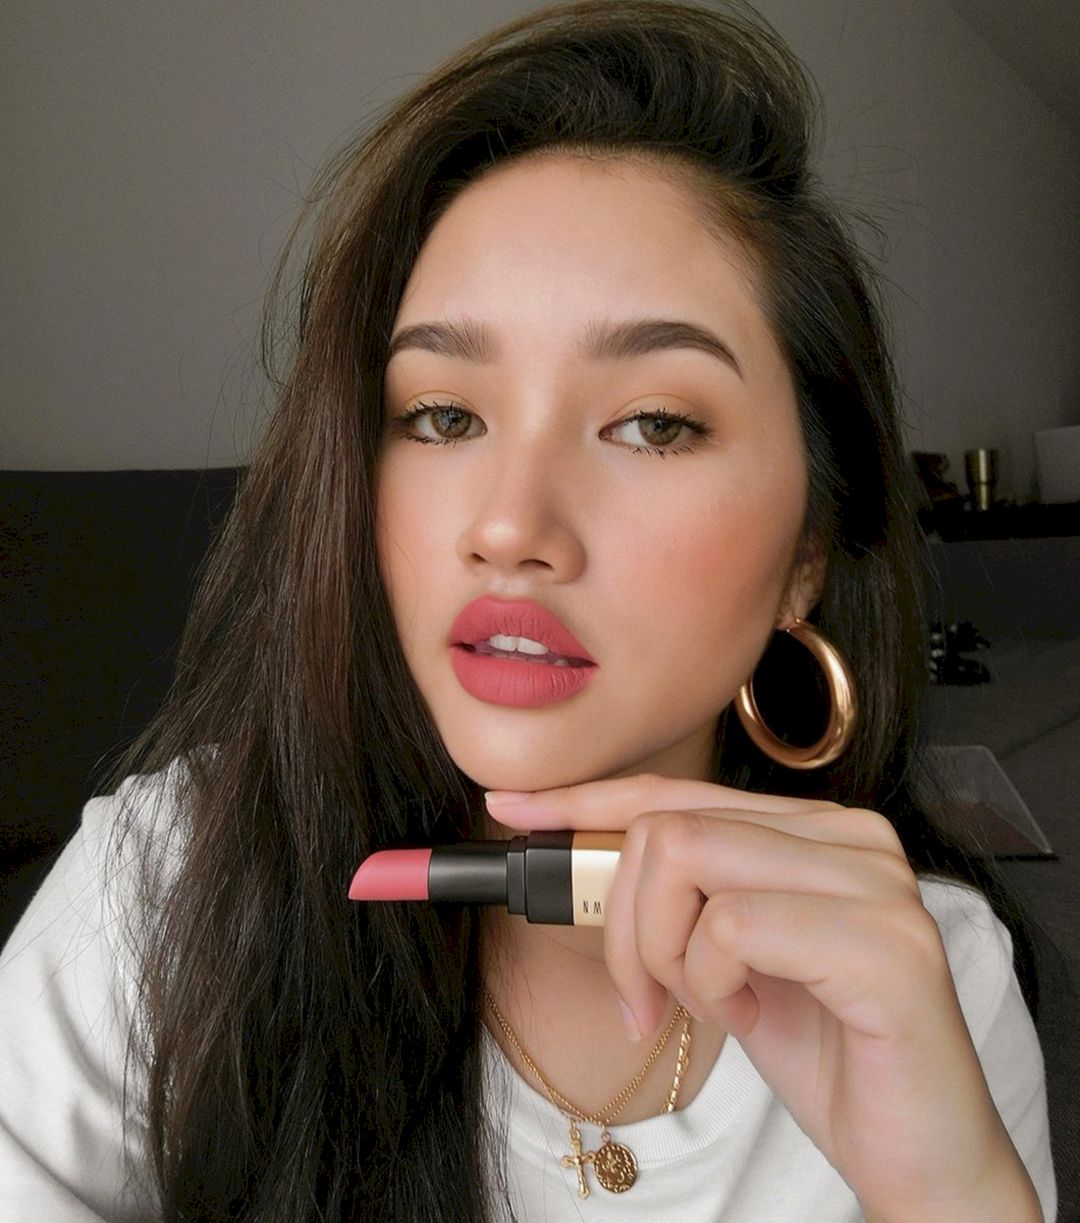 Bobbi brown lipstick color from bowty__np twitter